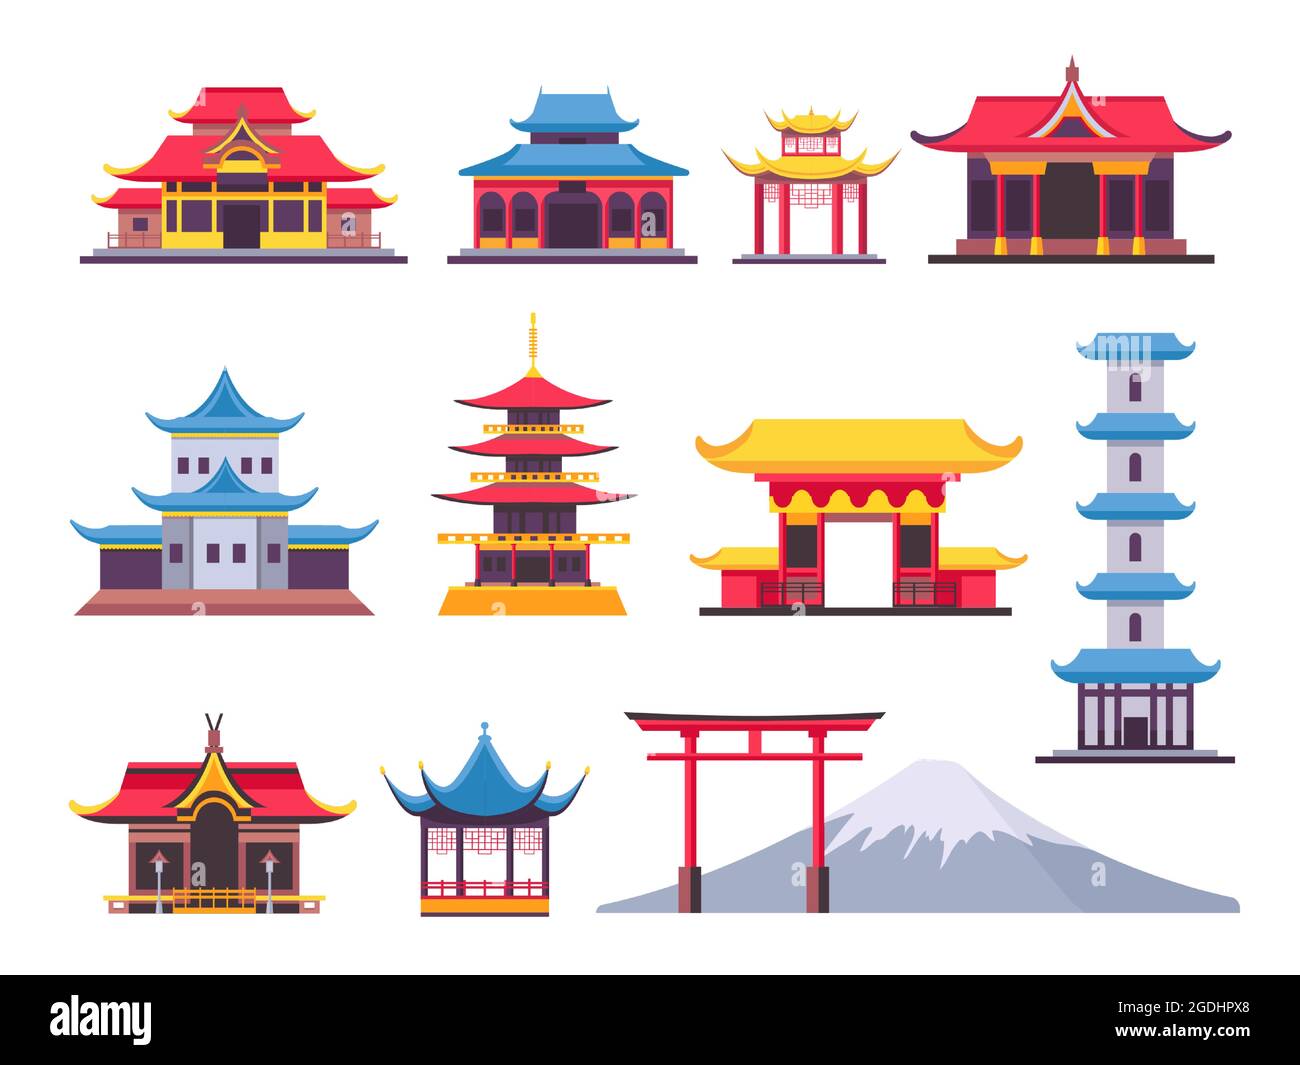 Flat japanese buildings, ancient pagoda and cultural landmark. Asian mountain fuji. Chinese towers, temples and traditional house vector set Stock Vector